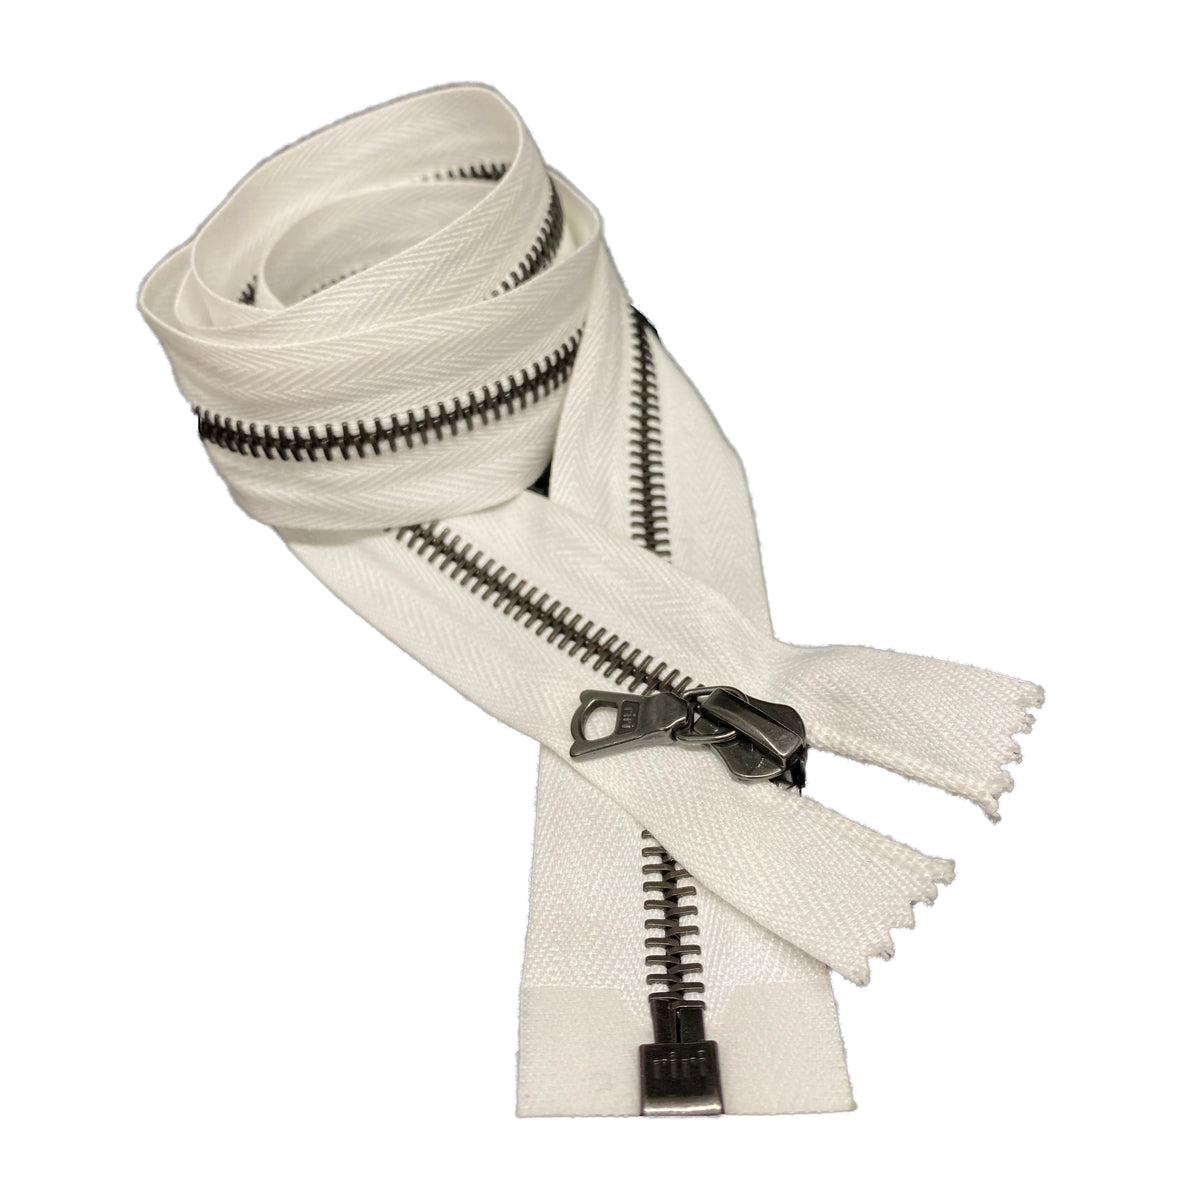 Riri Zippers Limited Edition With Silver And Gold Finish 